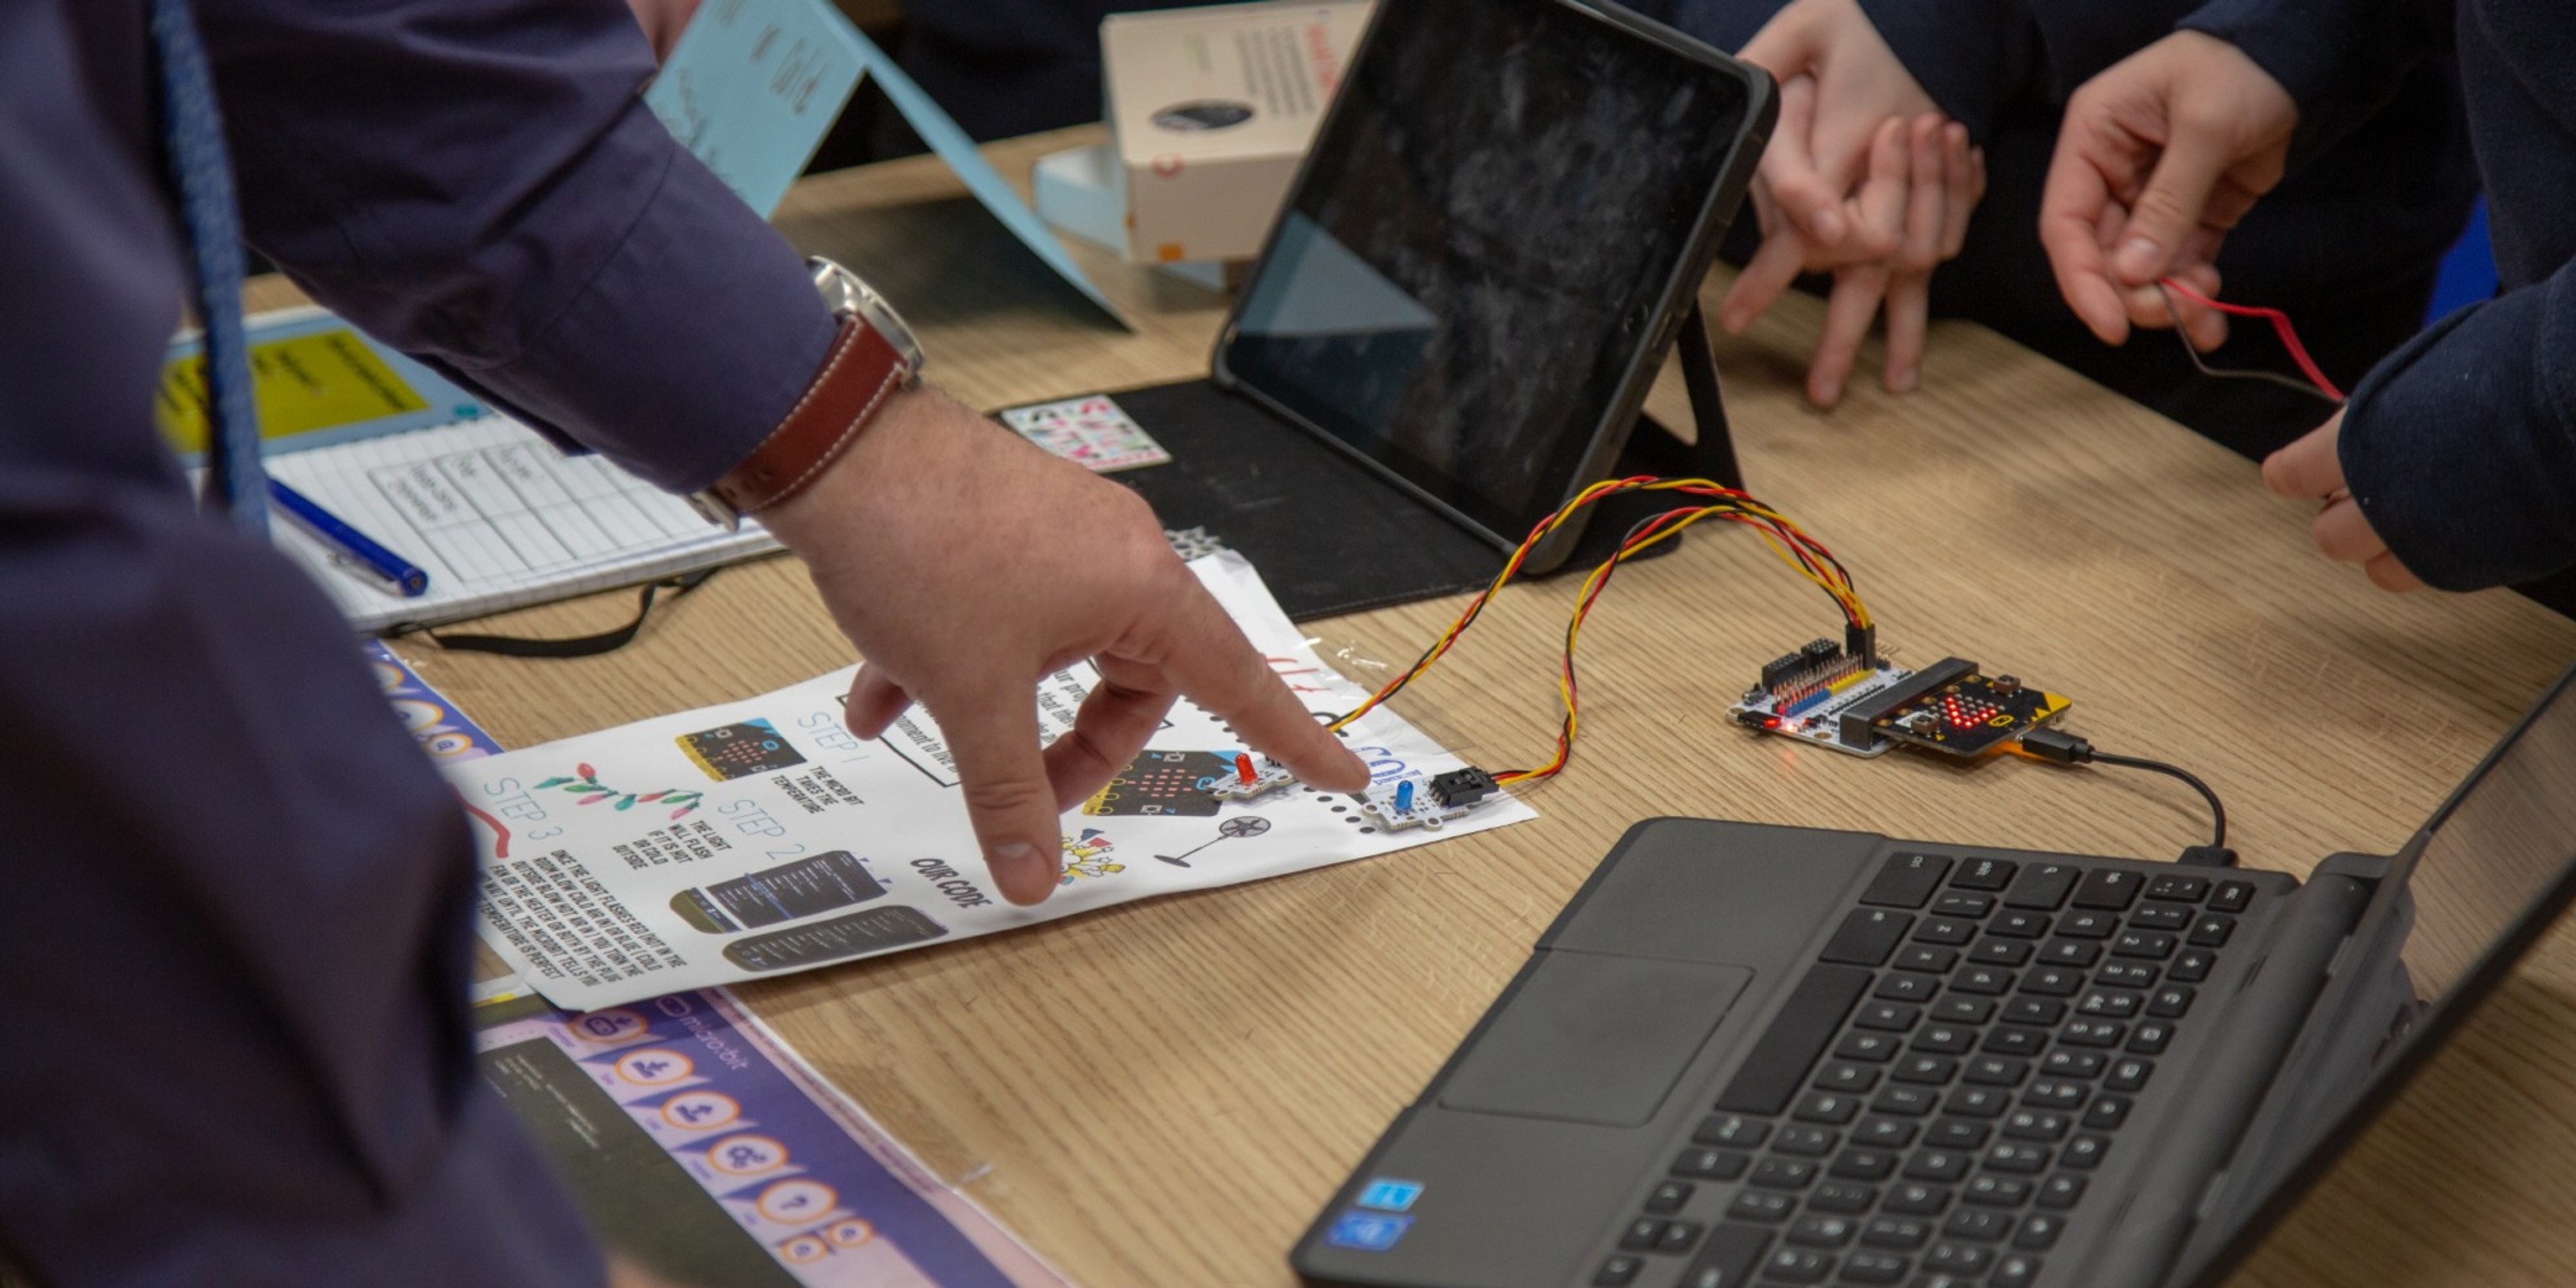 HOPE for computing education: Supporting university-school partnerships